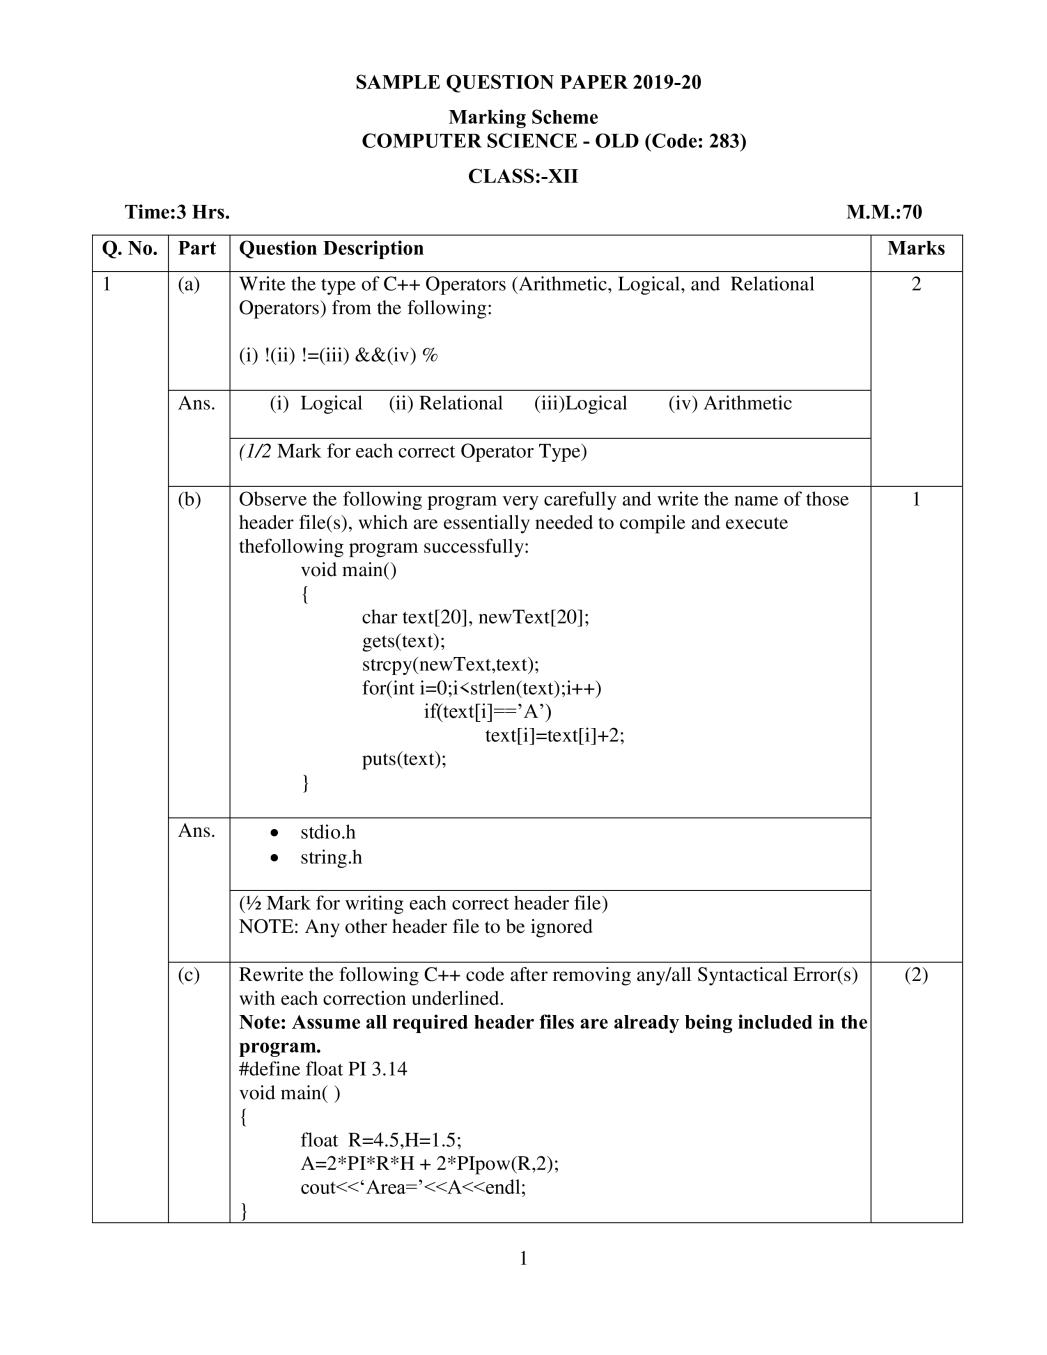 CBSE Class 12 Marking Scheme 2020 for Computer Science Old - Page 1